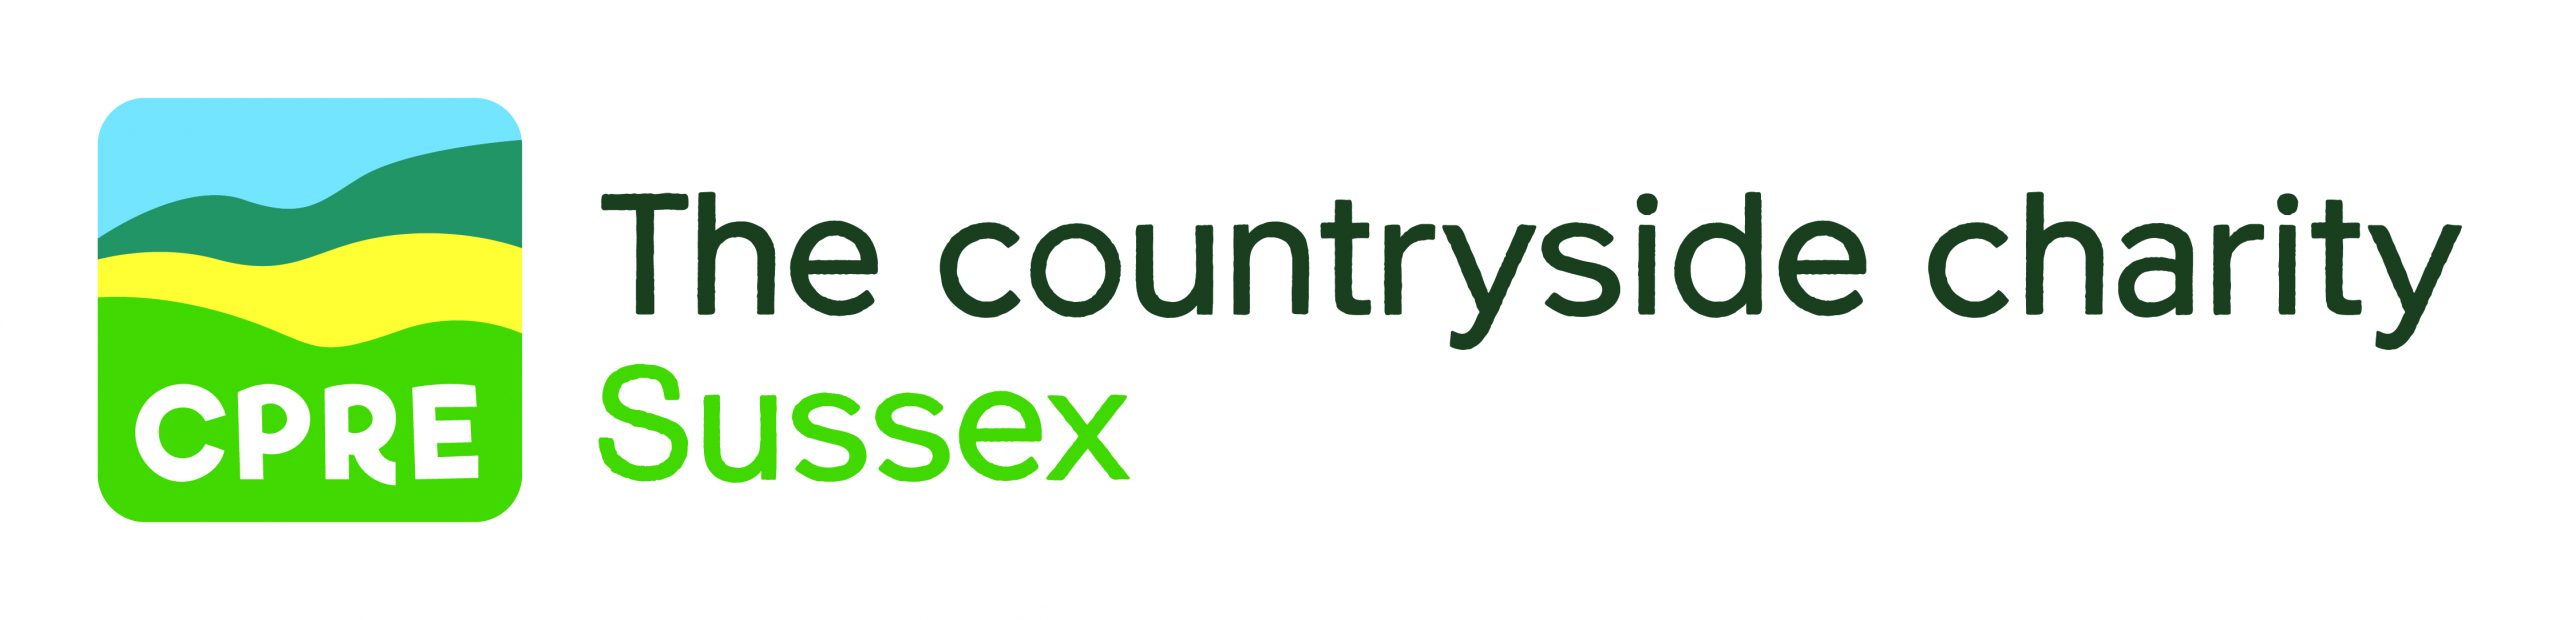 The Countryside Charity